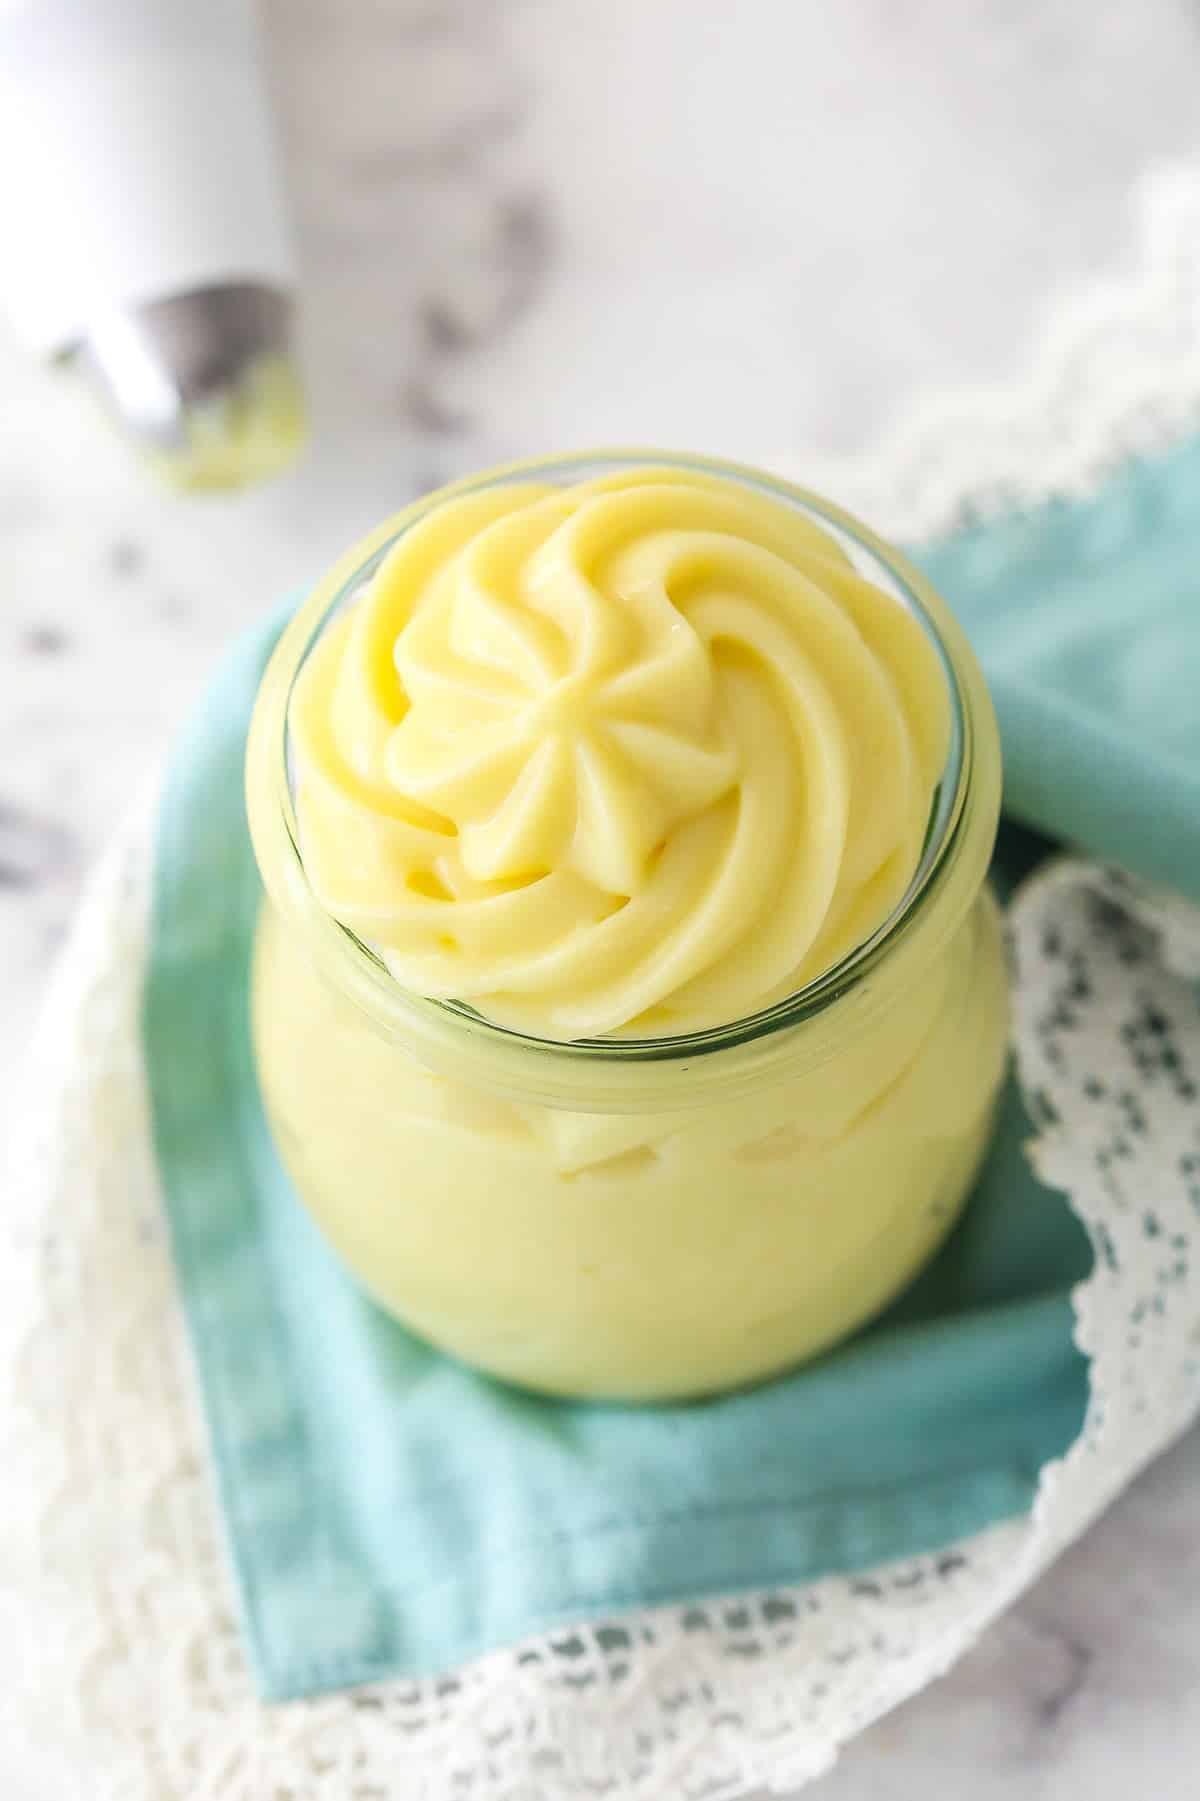 Pastry cream piped into a jar.